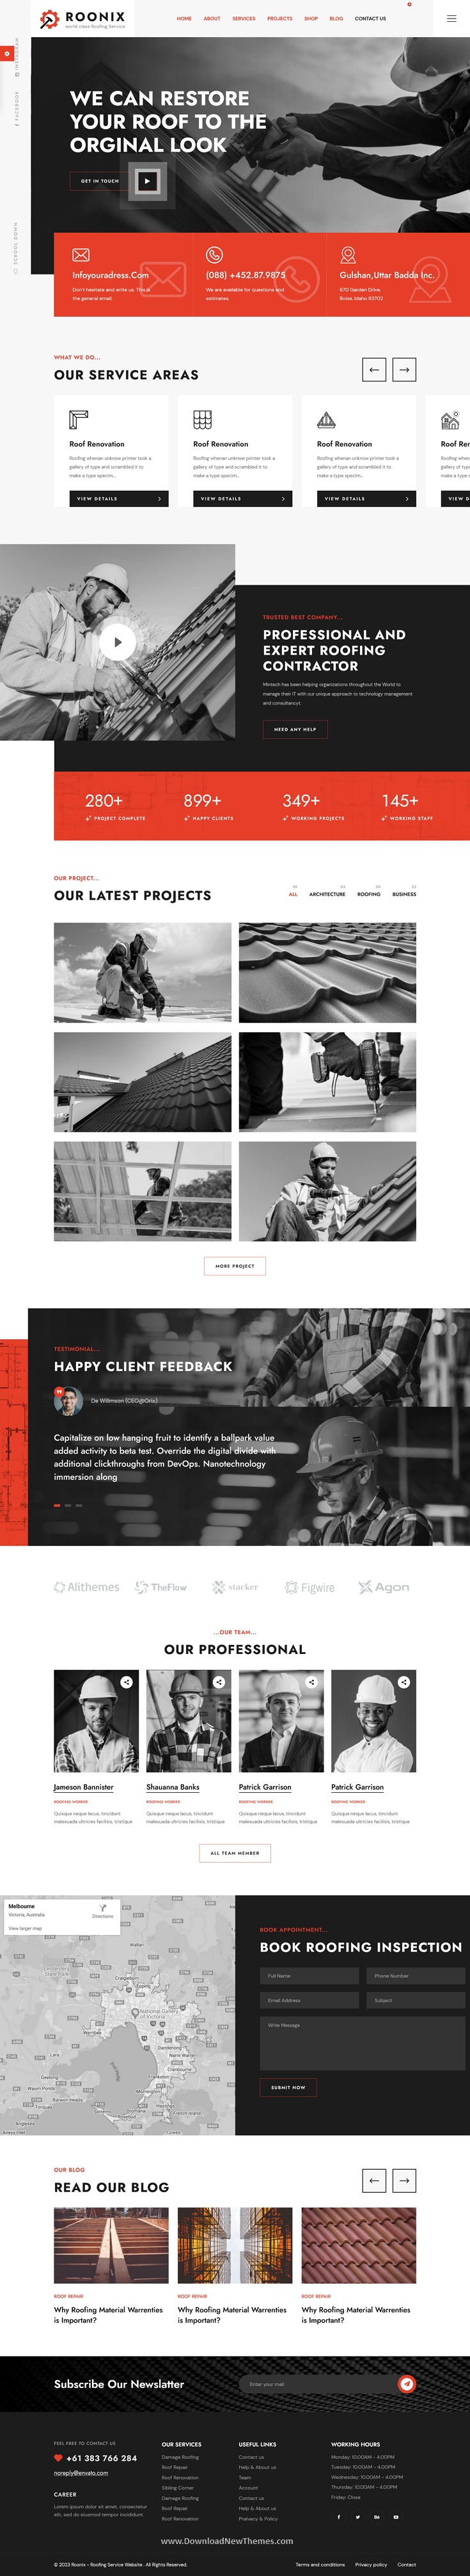 Roonix - Roofing Services HTML Template Review